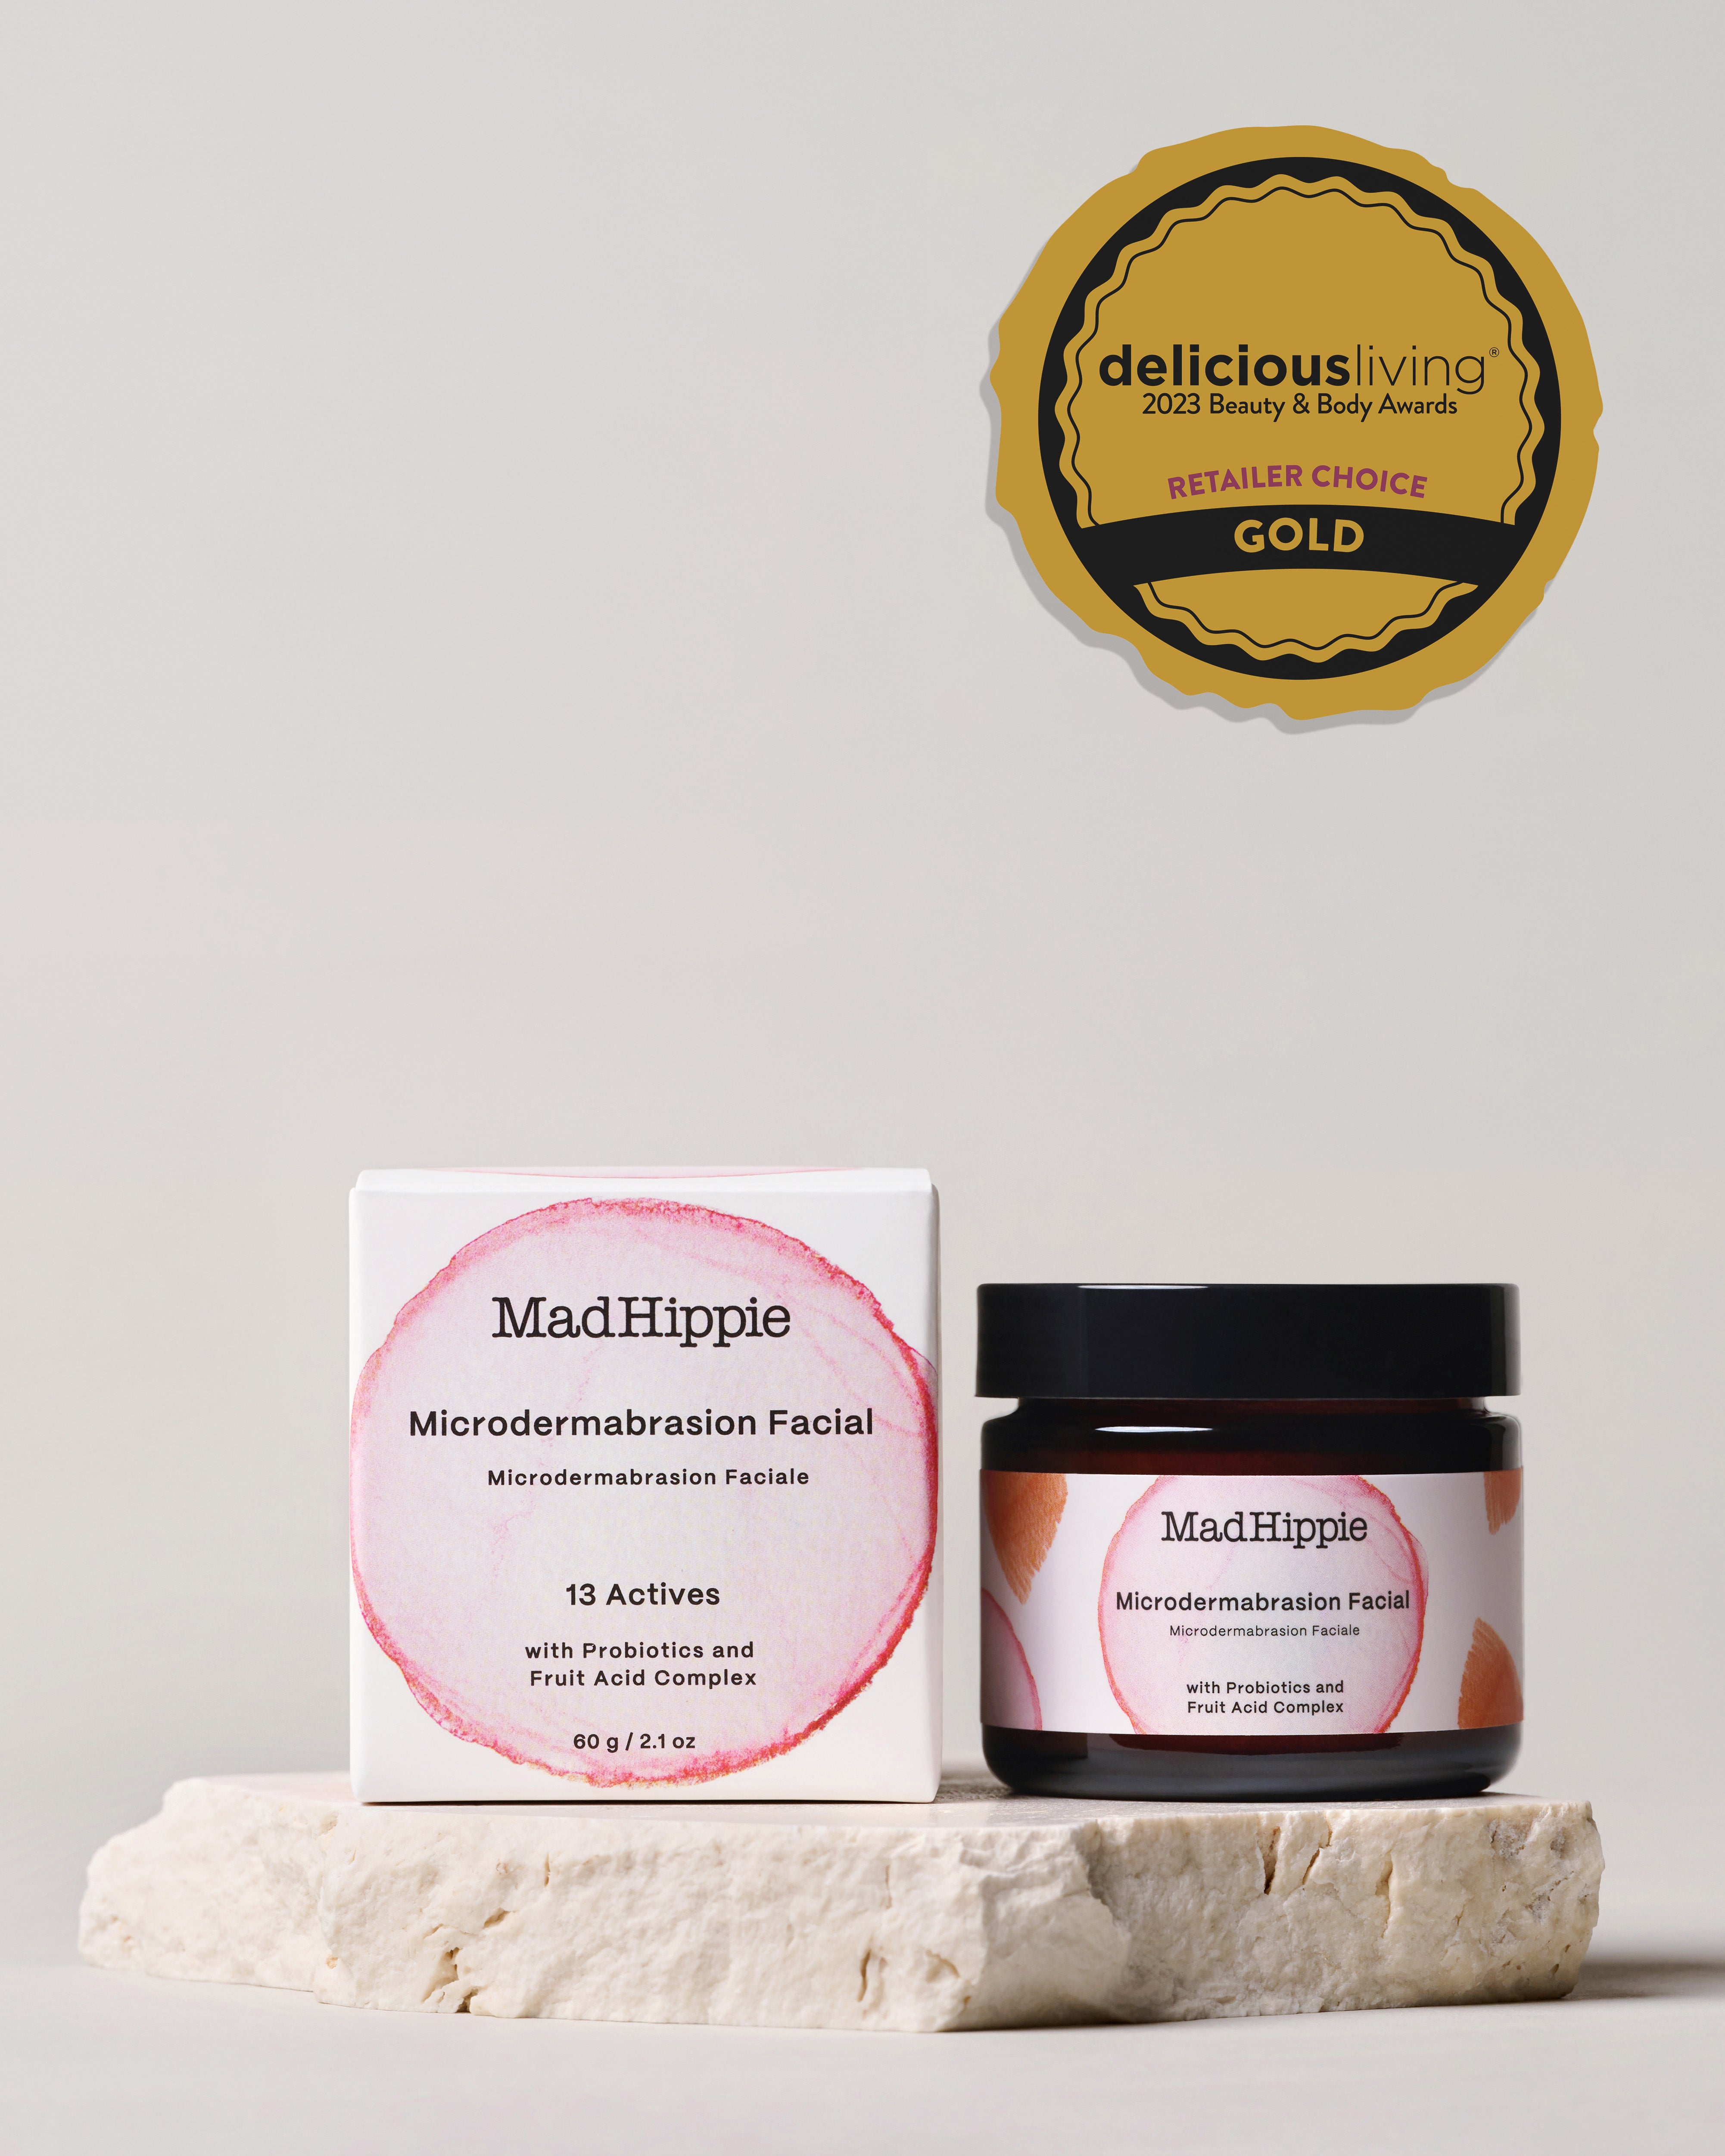 Microdermabrasion Facial Jar + box on stone slab, with gray background. Gold award badge in upper right corner